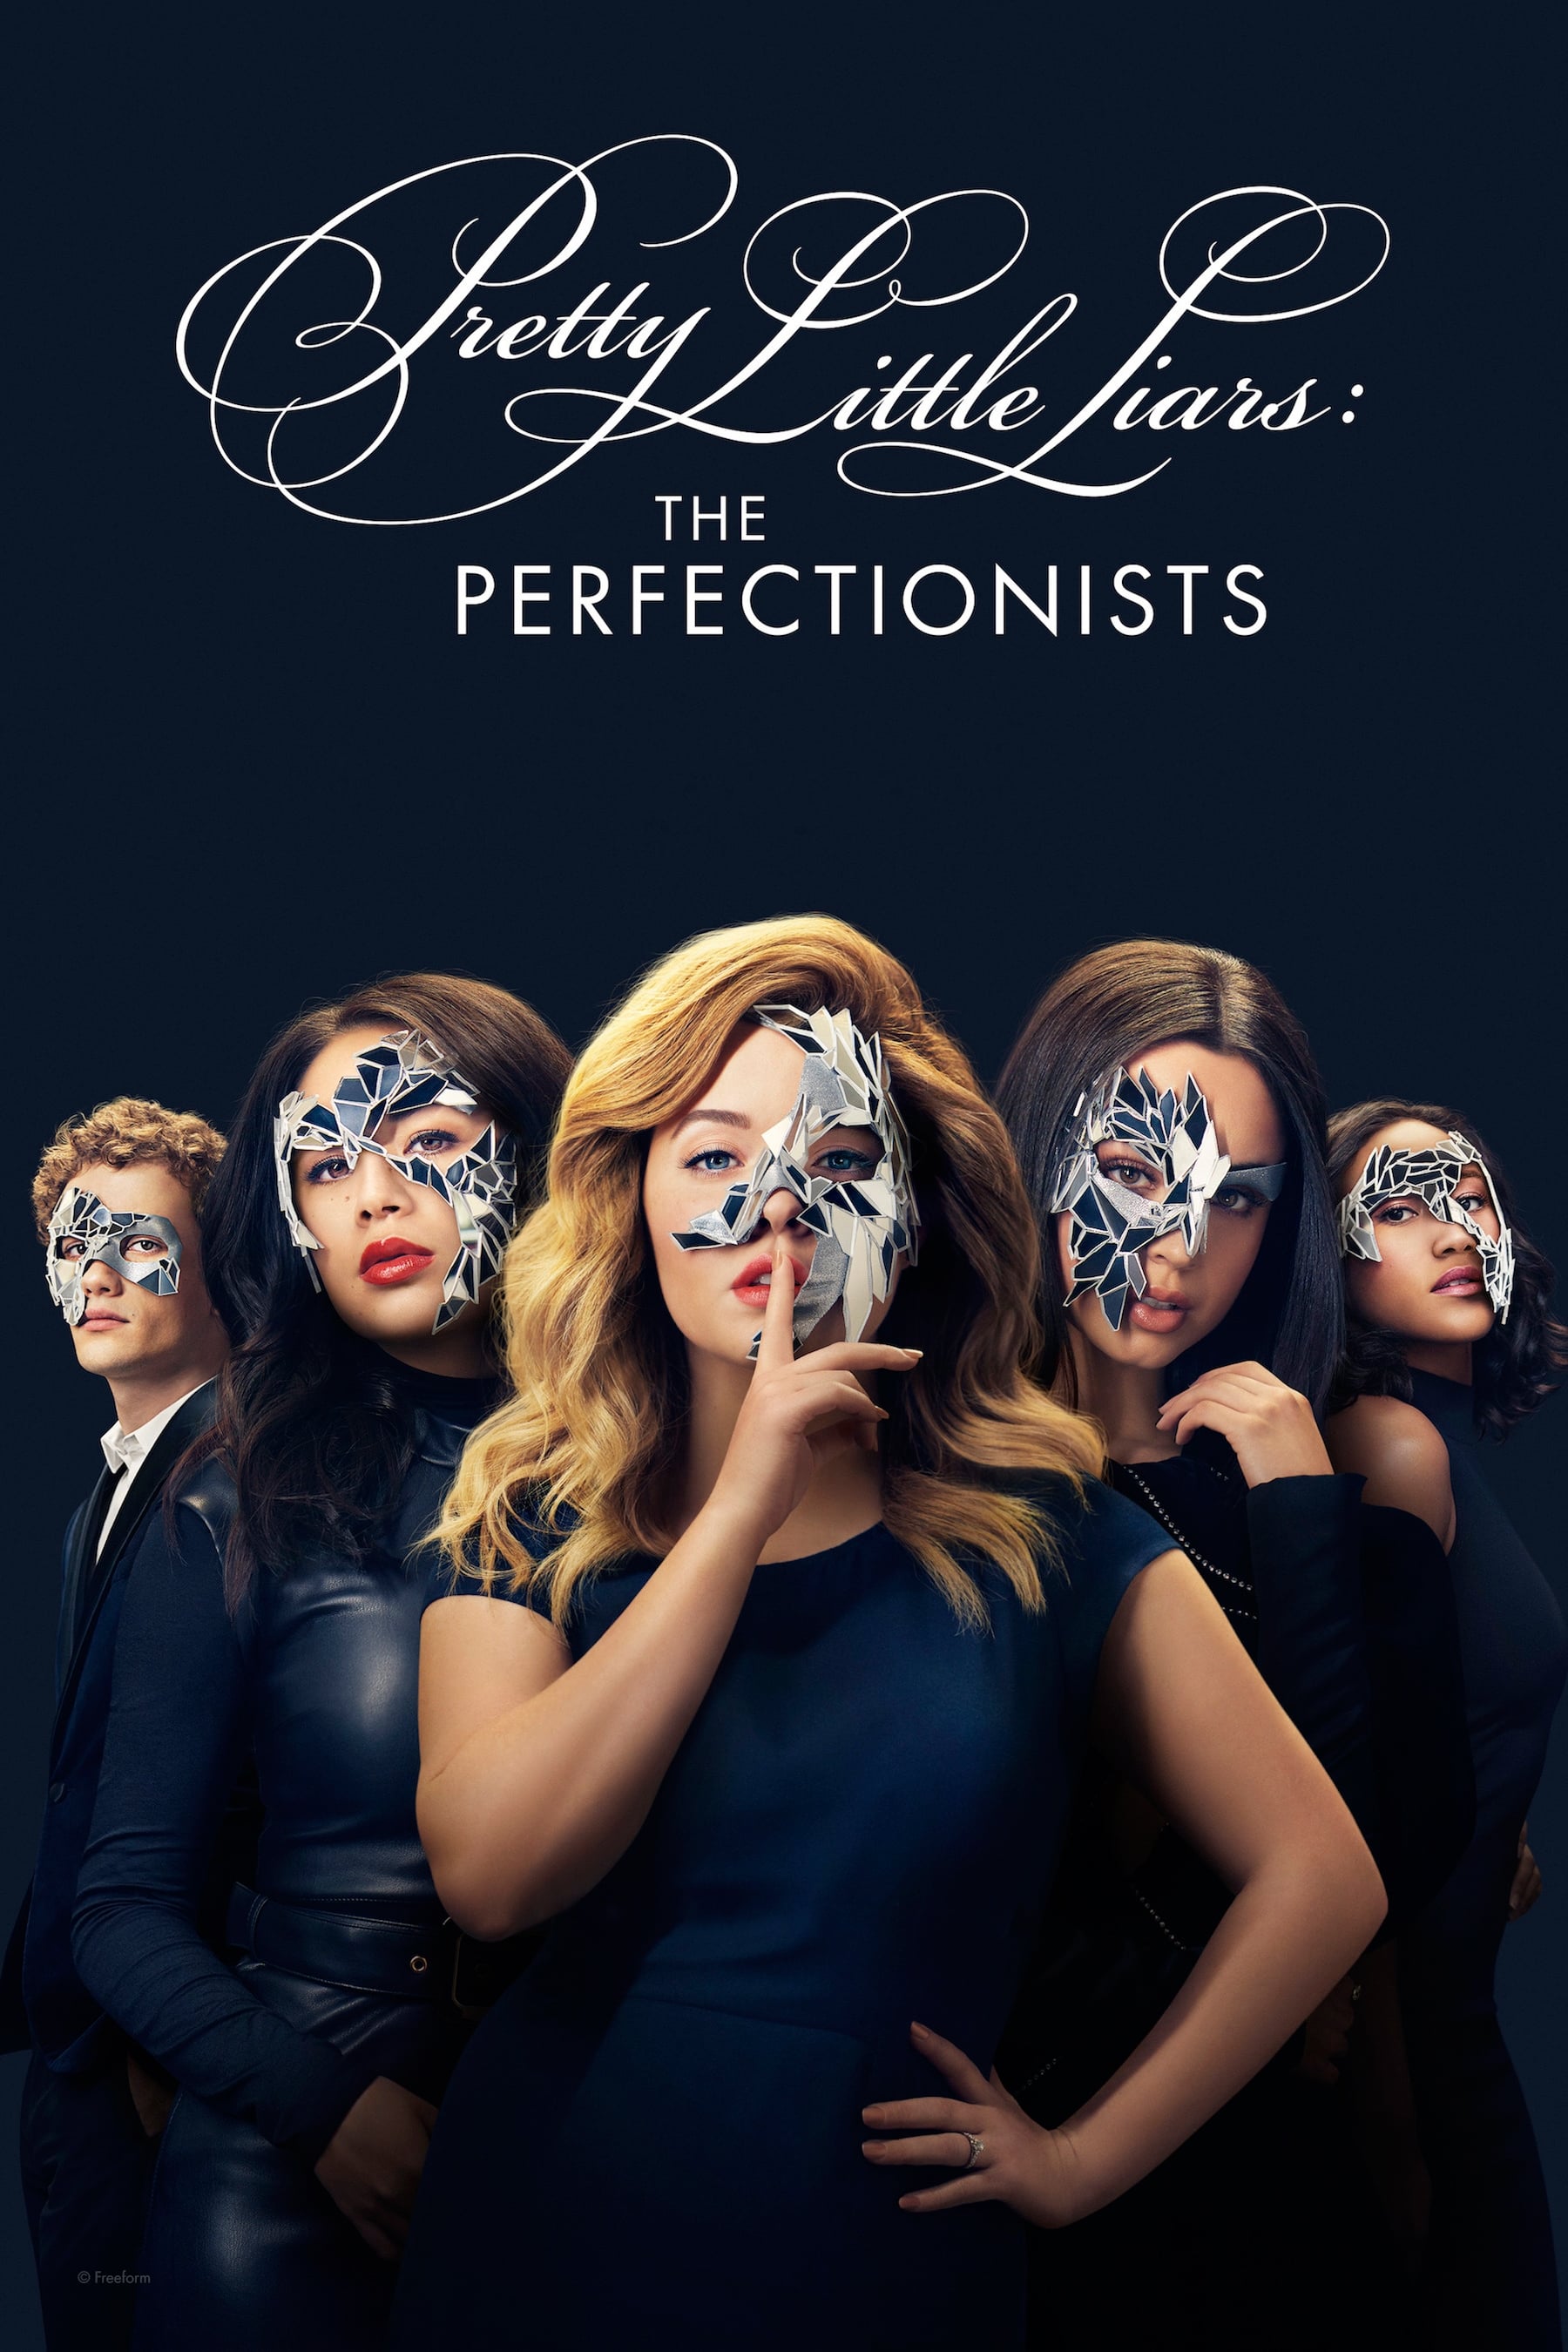 Pretty Little Liars: The Perfectionists TV Shows About Based On Young Adult Novel